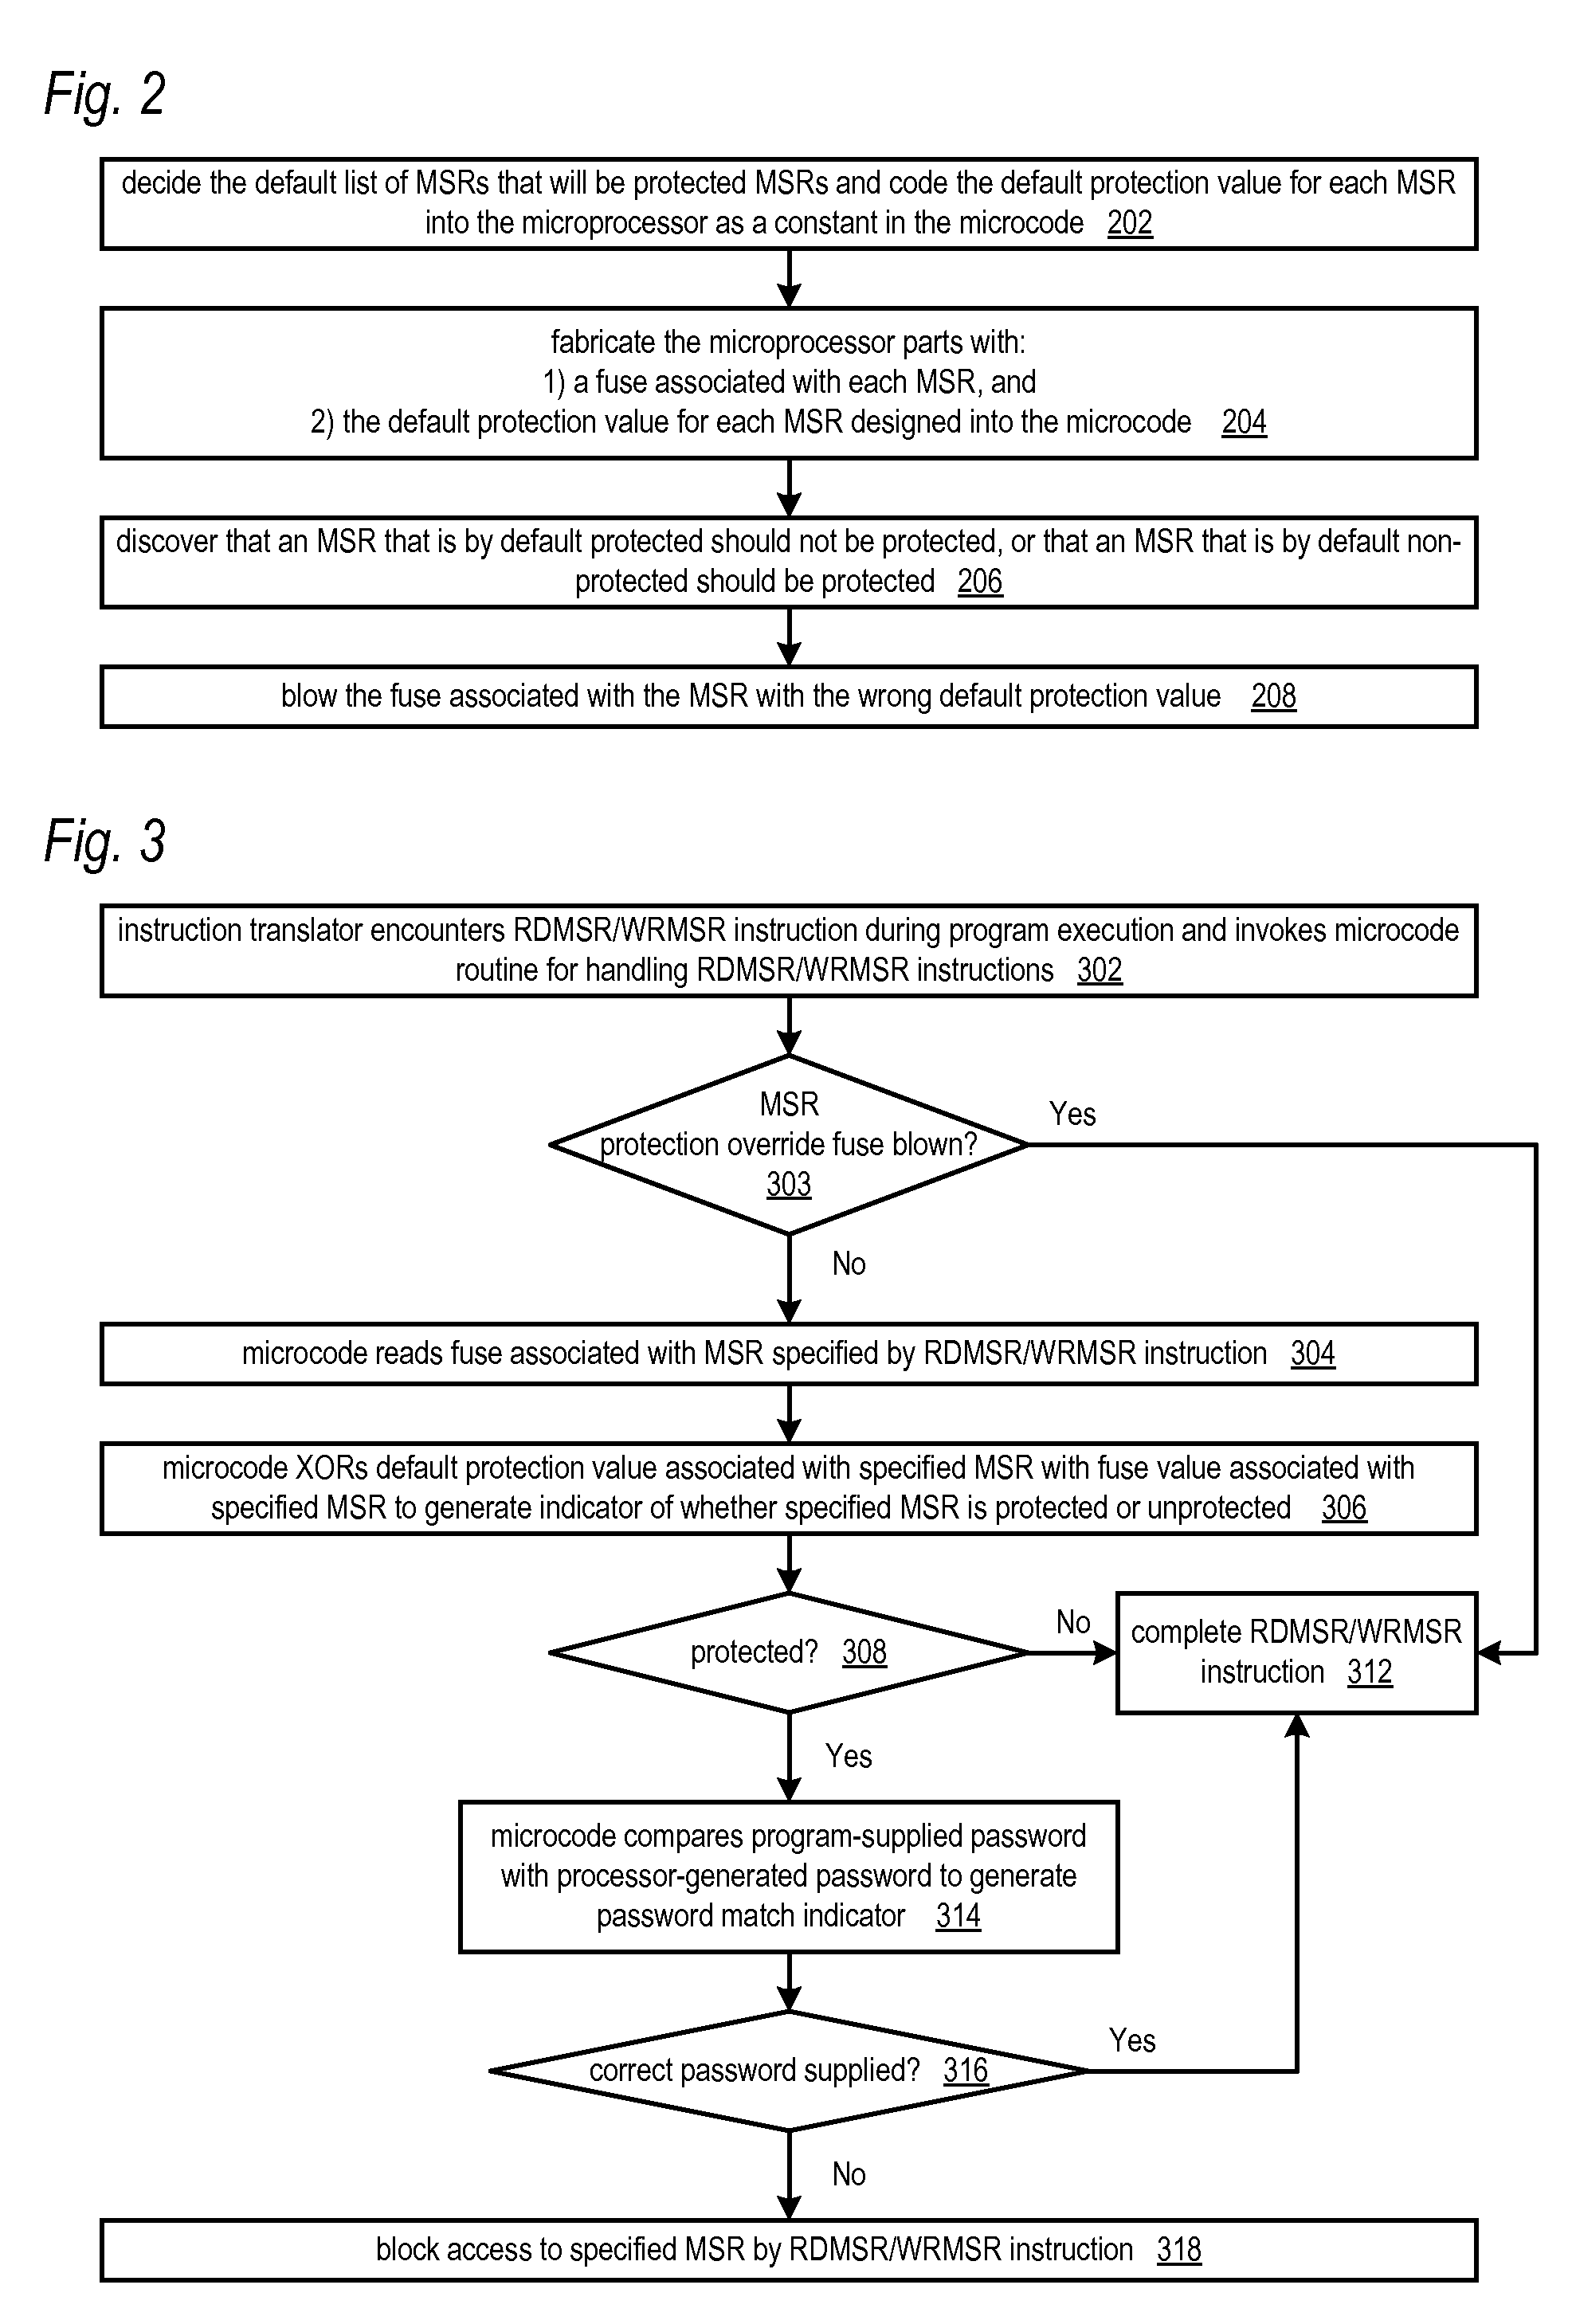 Apparatus and method for updating set of limited access model specific registers in a microprocessor